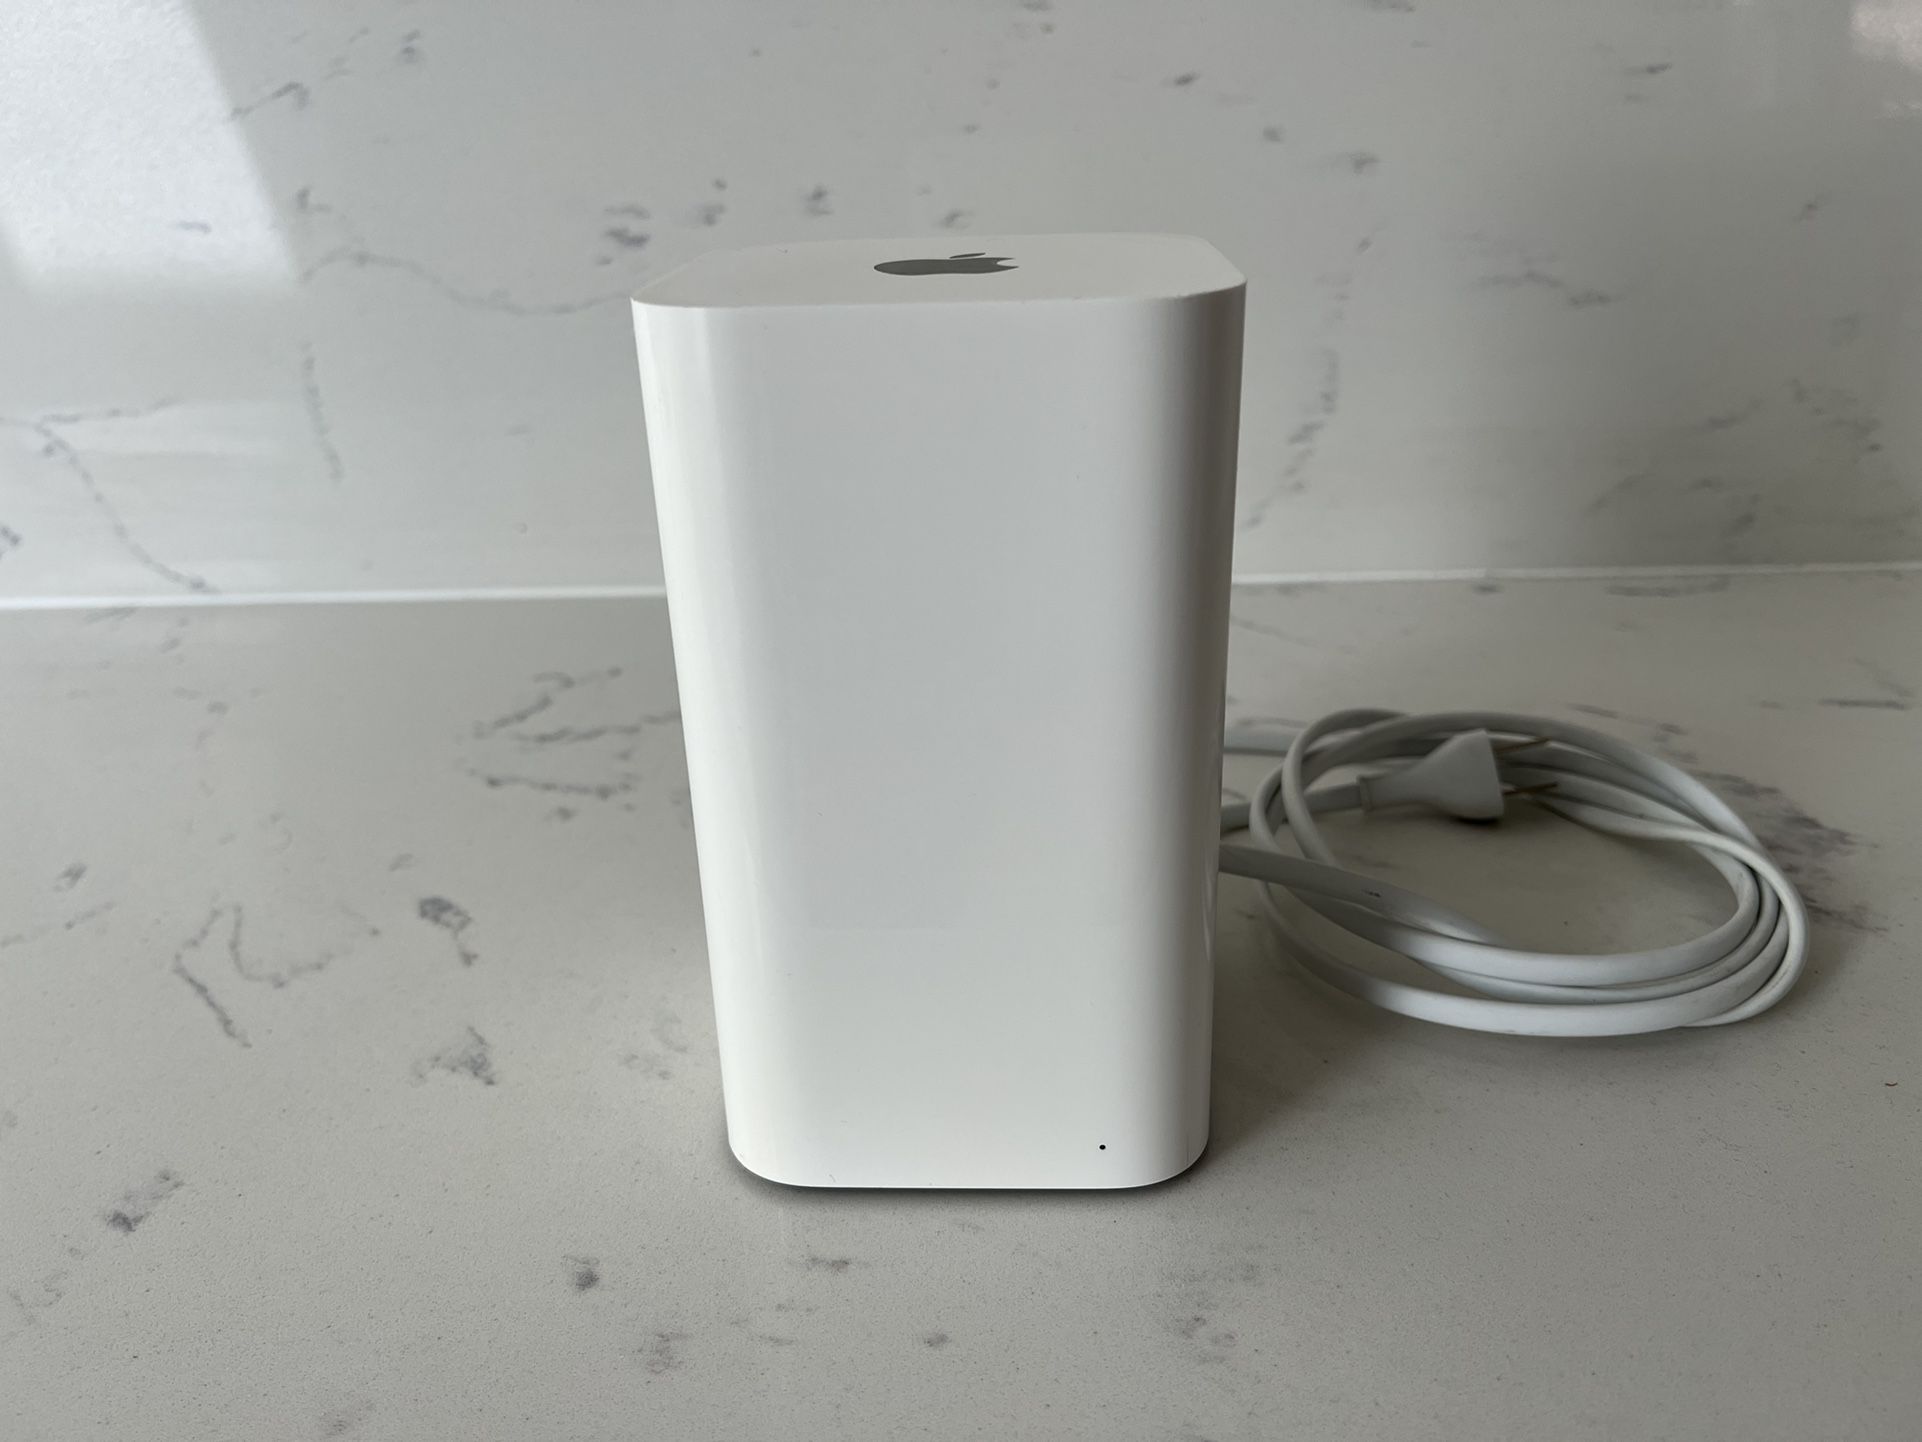 Apple AirPort Extreme 6th Gen (Latest) 802.11ac A1521 ME918LL/A